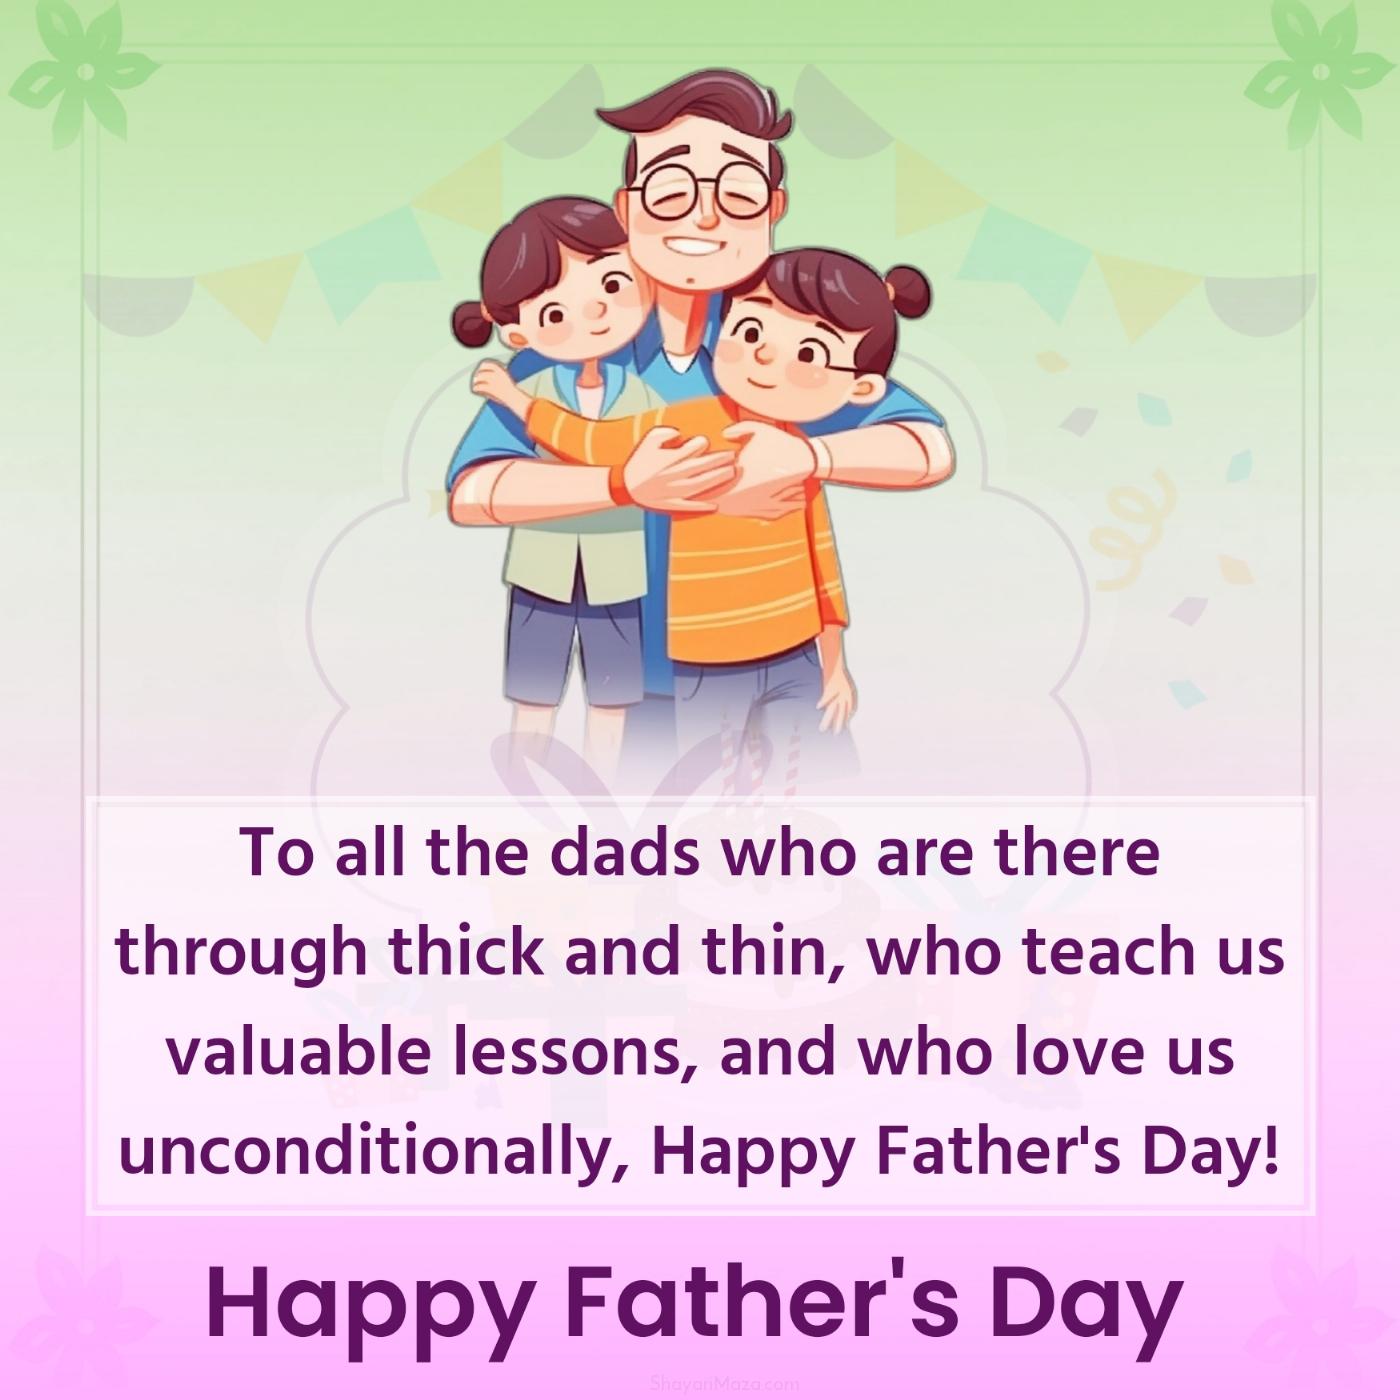 To all the dads who are there through thick and thin